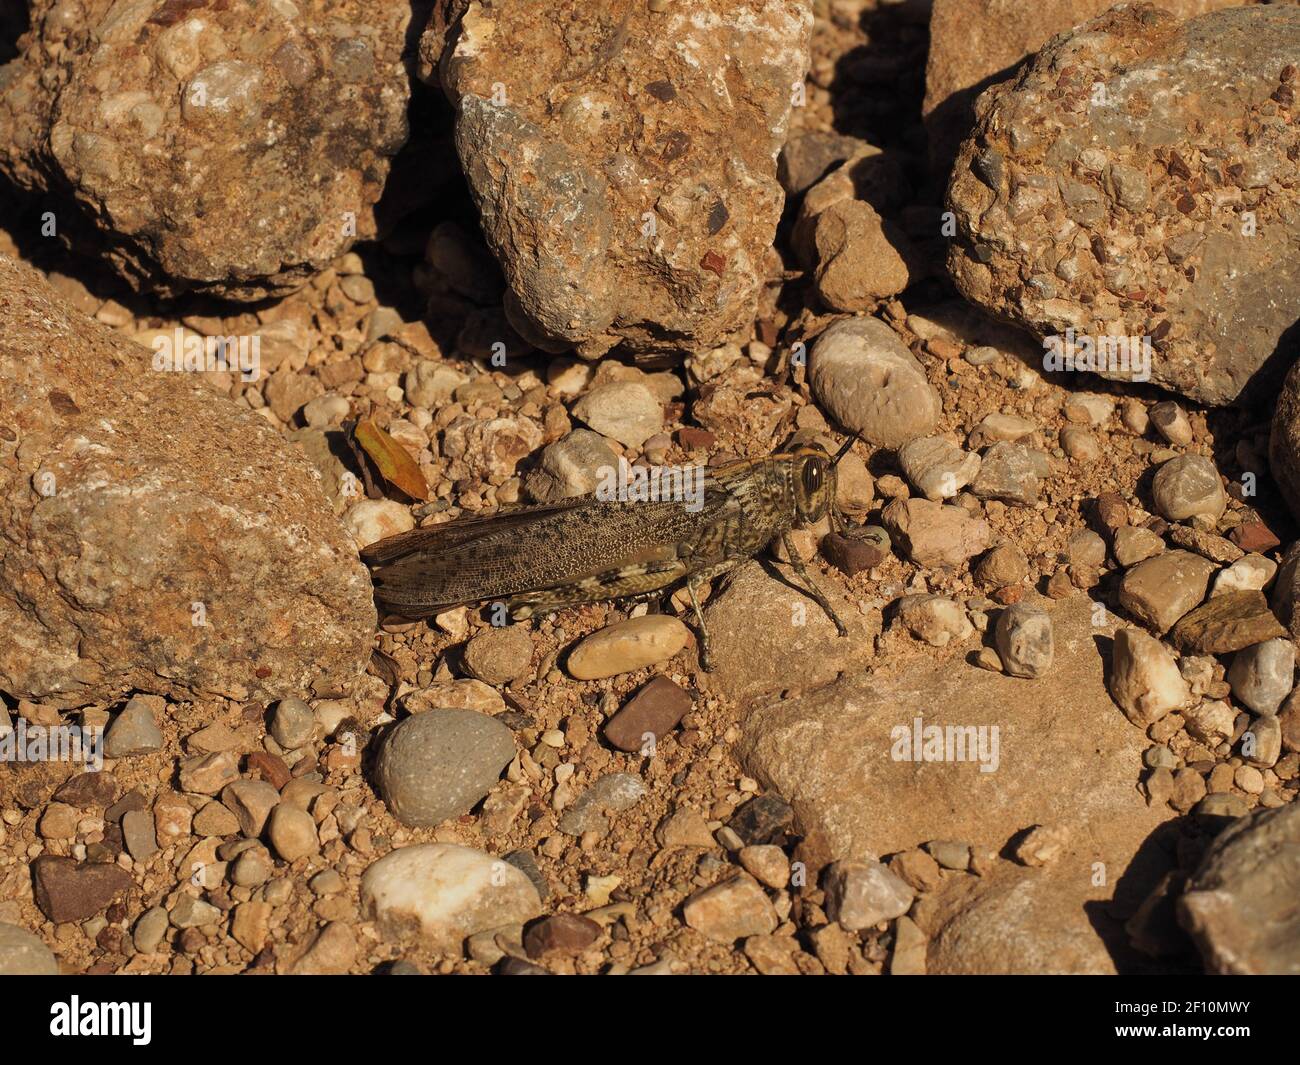 Gregarious locust, camouflaged against rocks and sand. Found on mountainside in Peloponnese, Greece Stock Photo